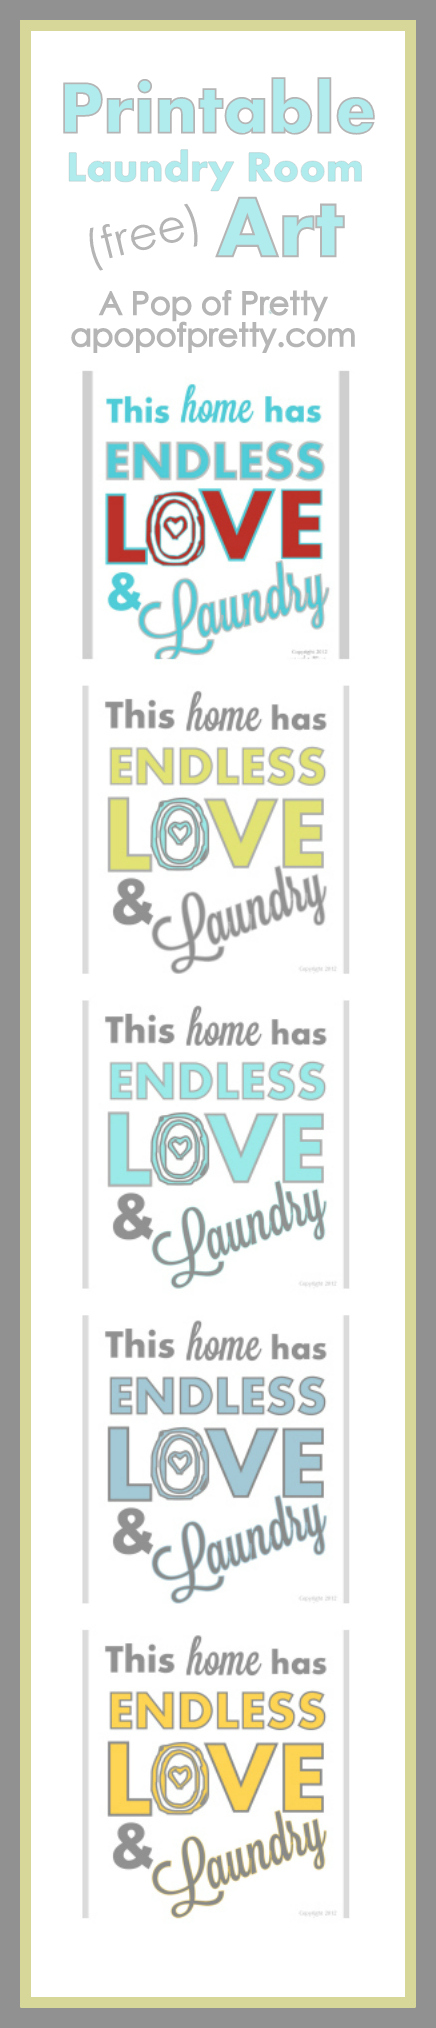 Free Printable Artwork, “Endless Love & Laundry”: Now in more color choices!